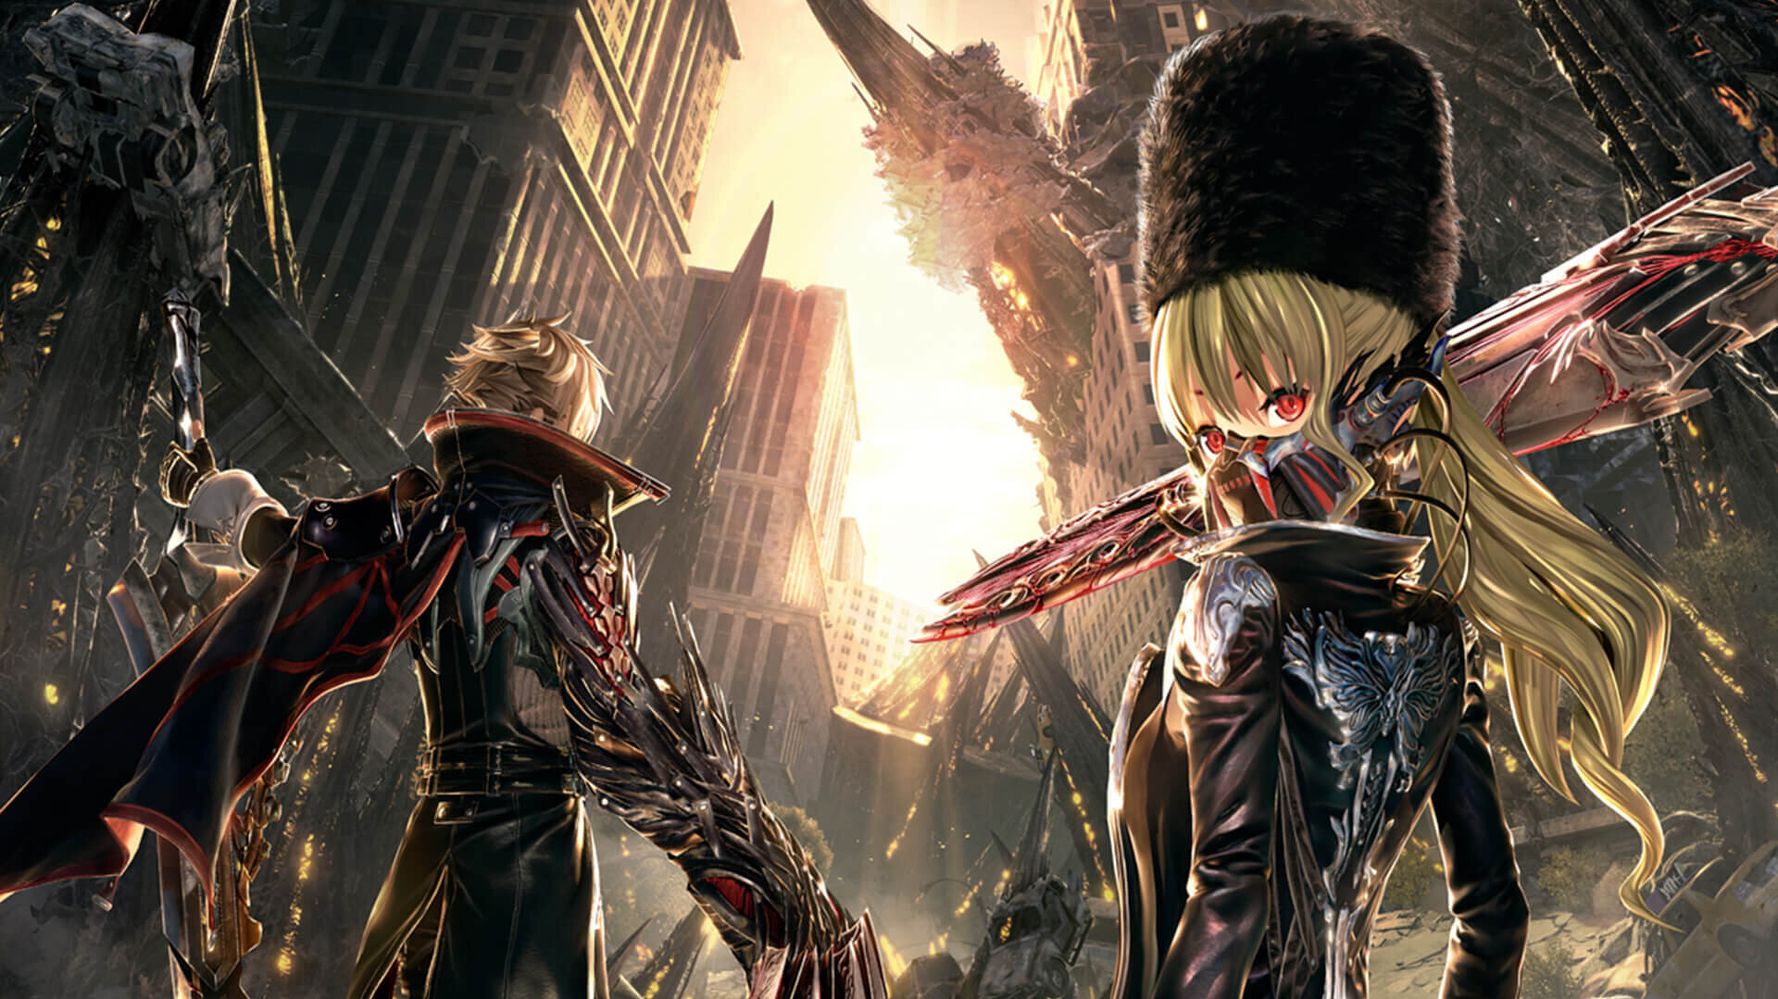 Code Vein Is An Accessible Take On Dark Souls With Better PC Performance.